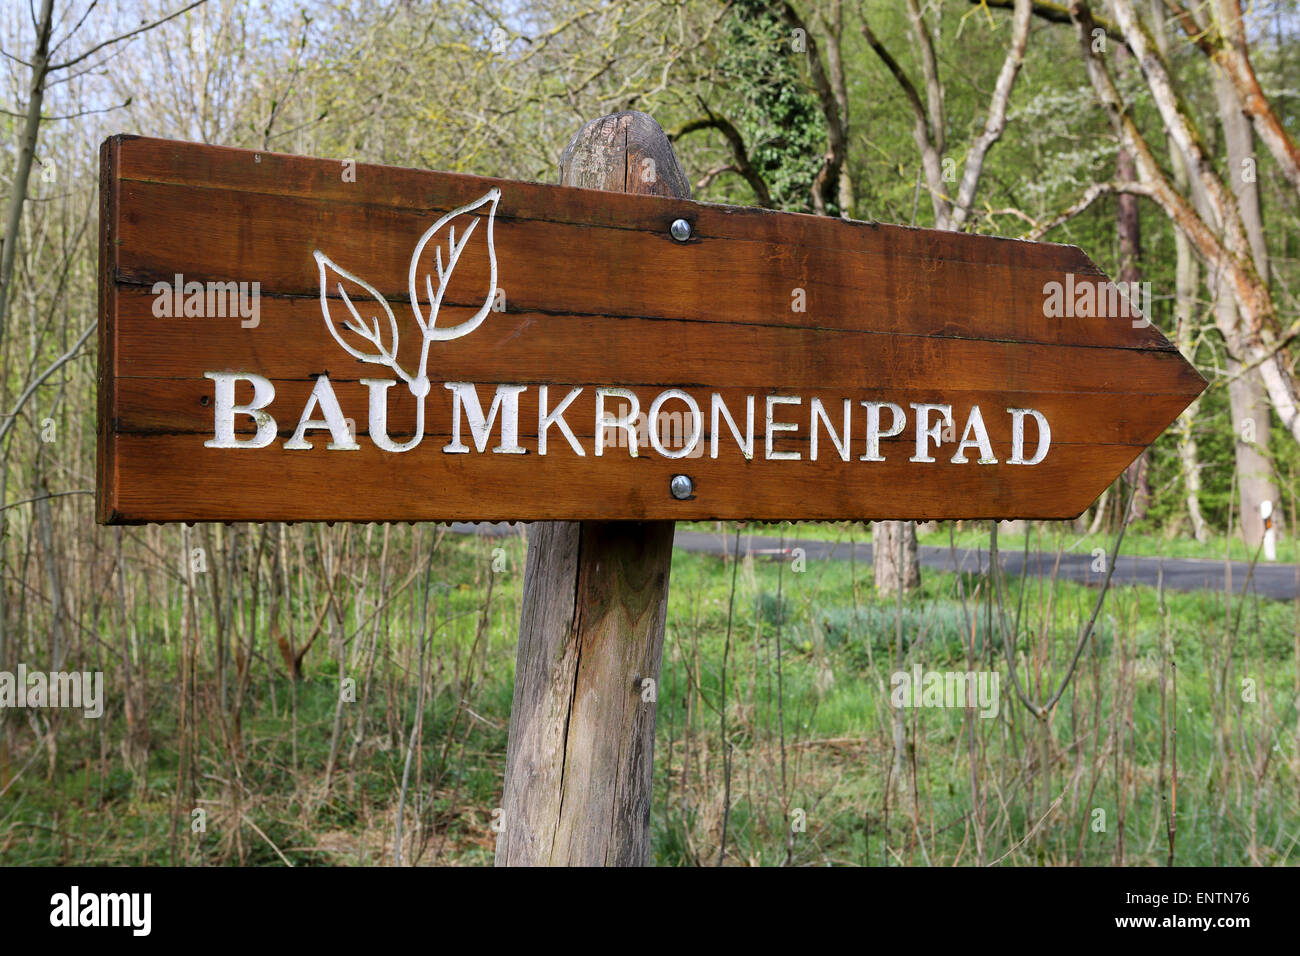 A sign for the Baumkronenpfad (canopy walkway) in Hainich National Park, Germany. Stock Photo